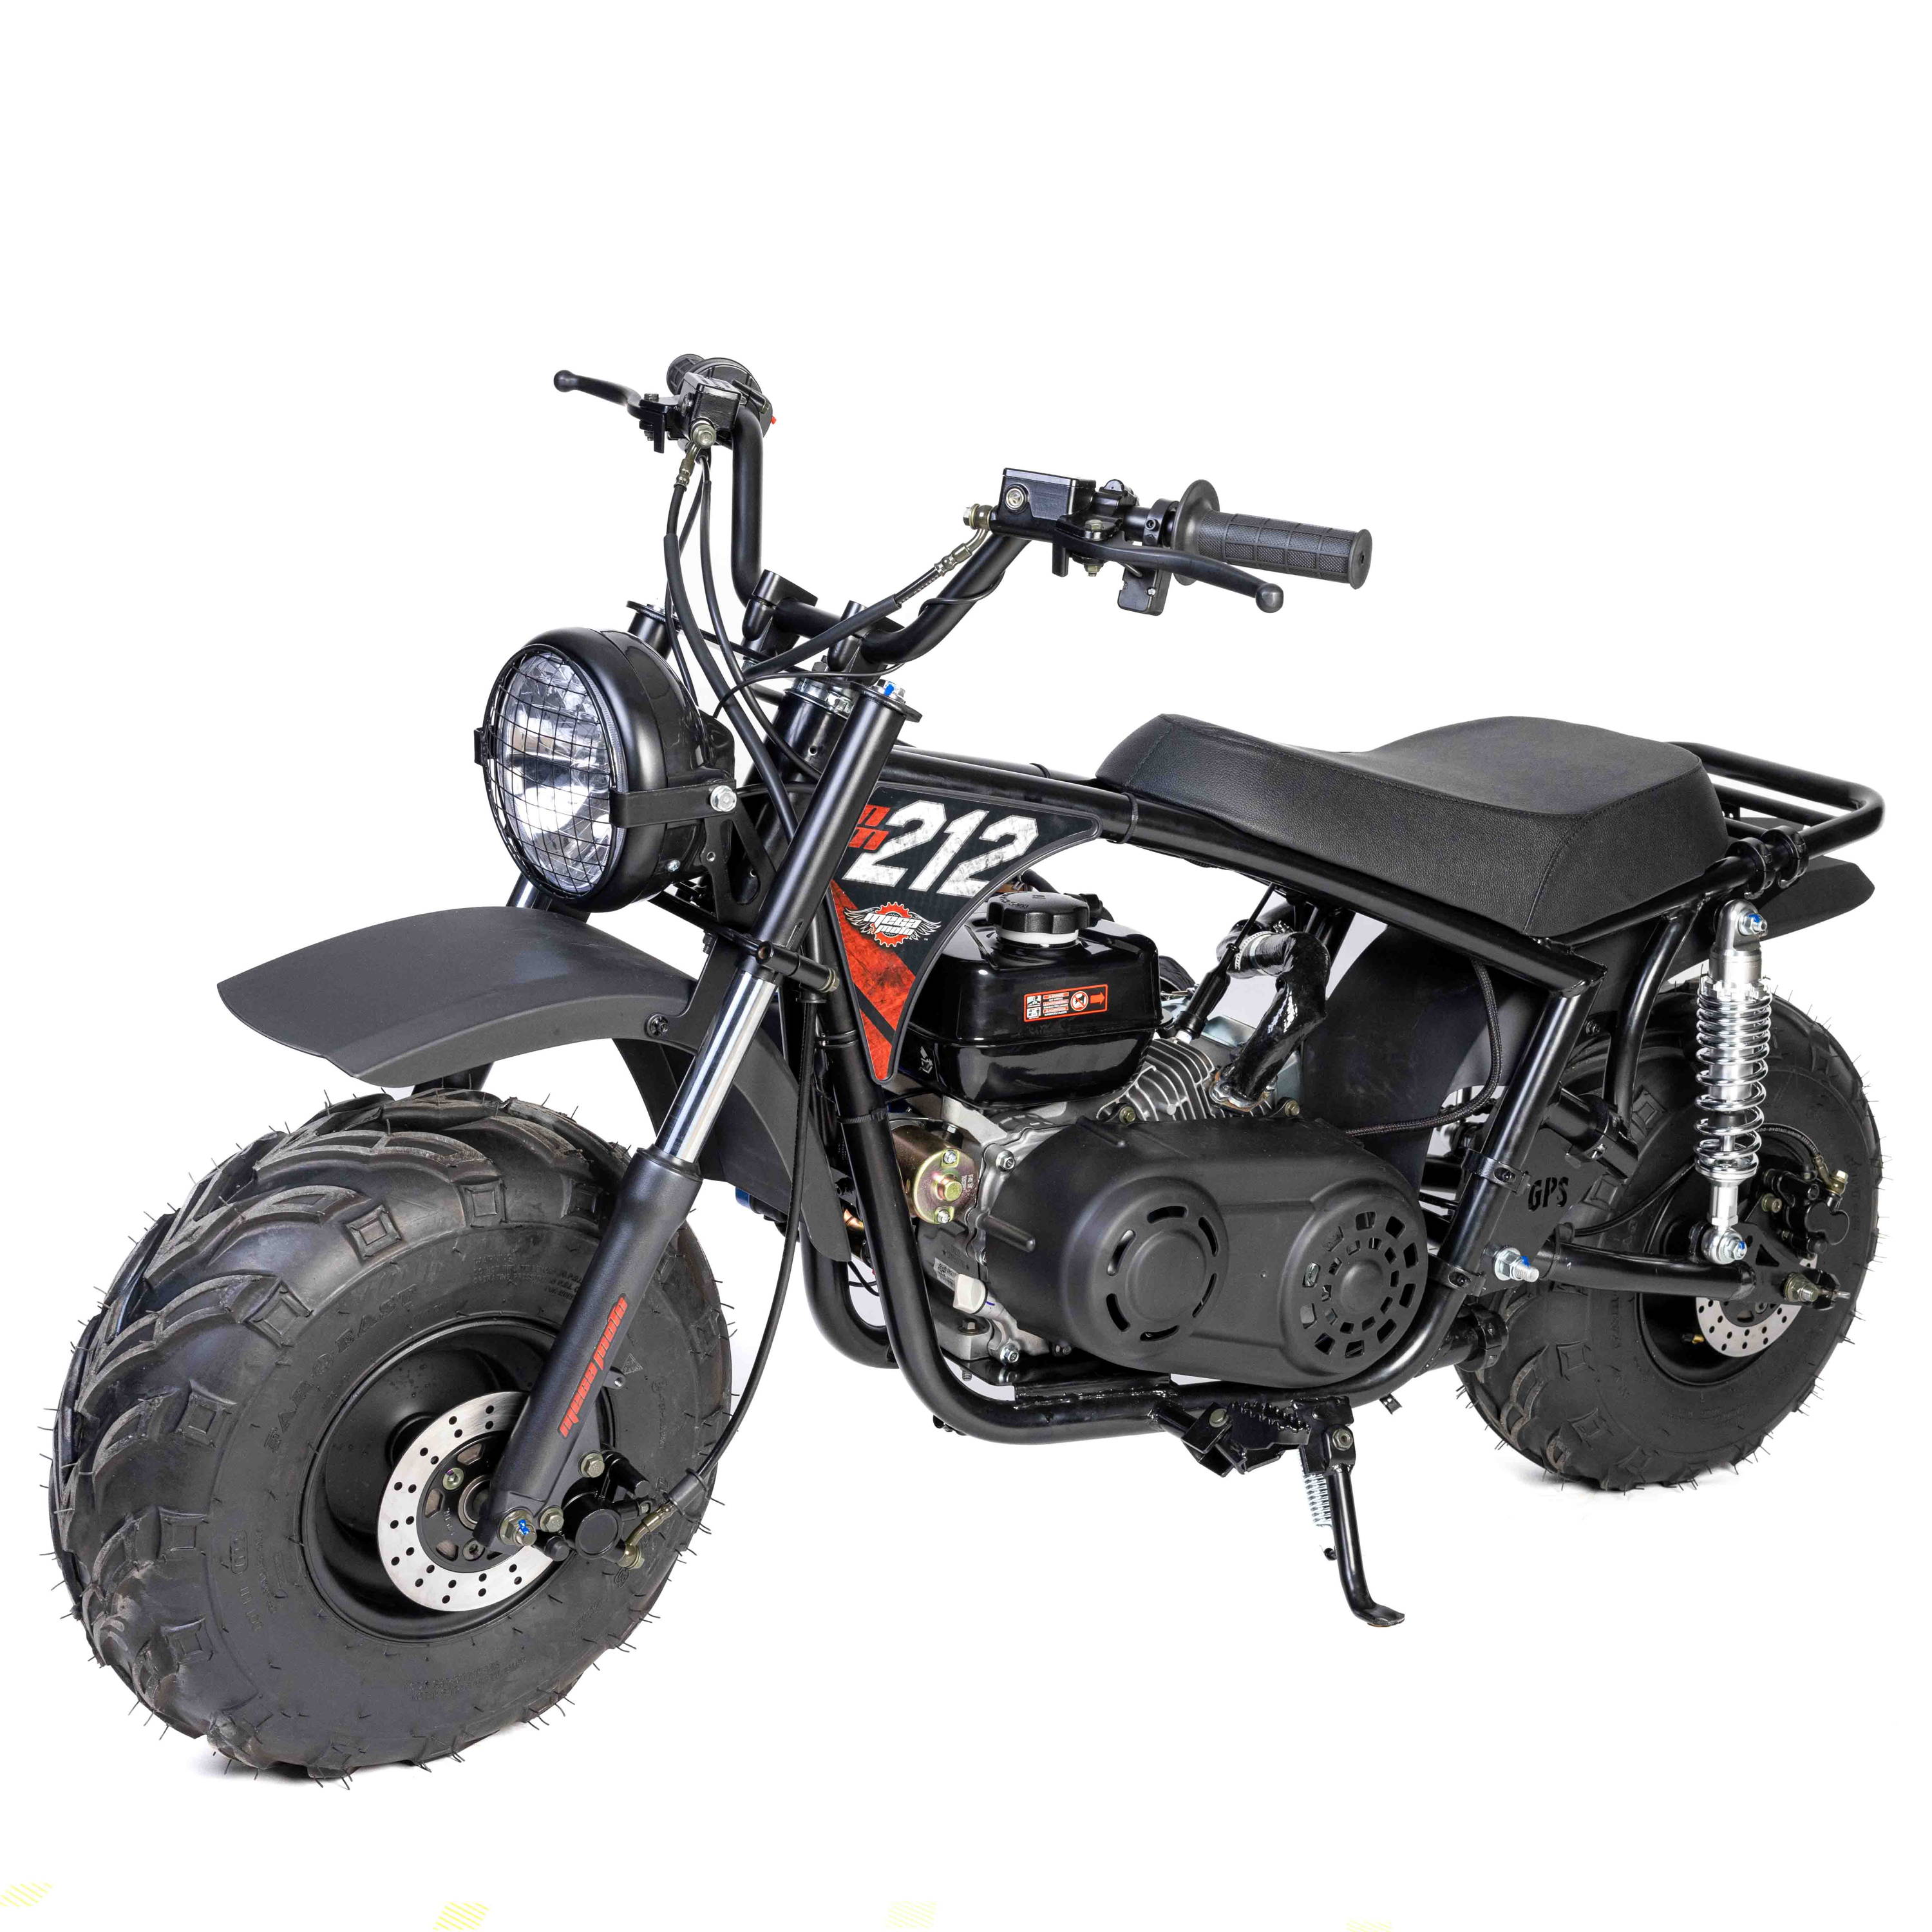 The megalodon minibike kit and the trailmaster hurricane 200x minibike review.